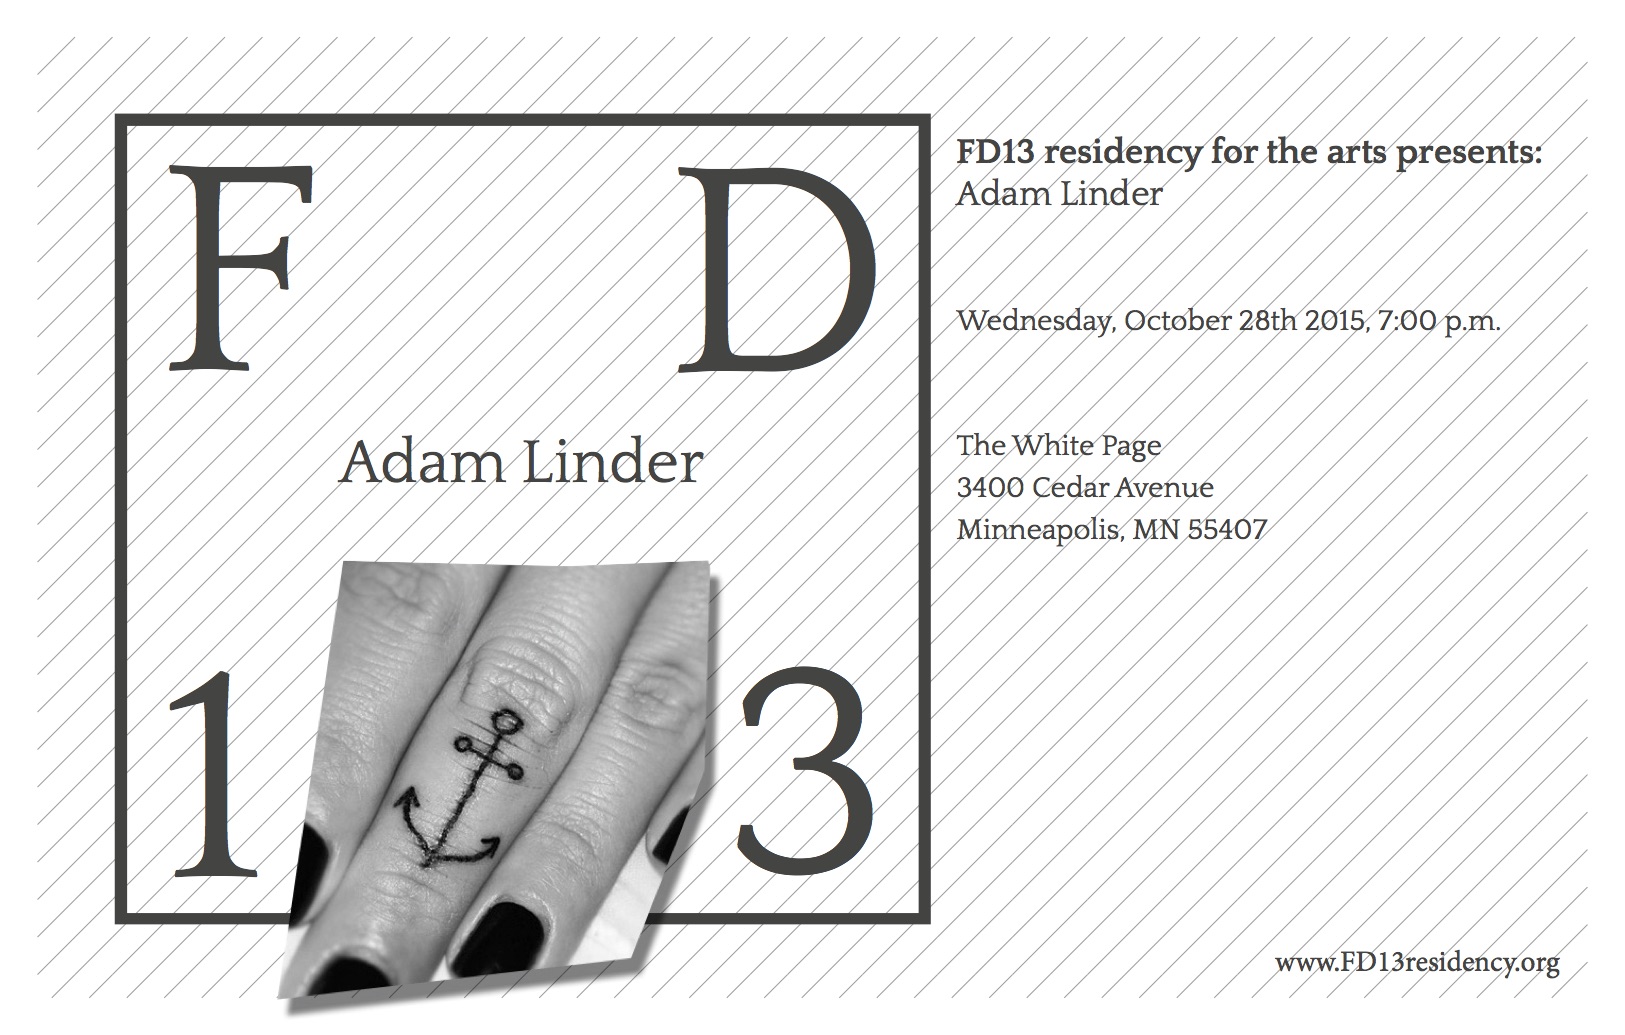 FD13 presents: Adam Linder. Wednesday, 28 October 2015, 7pm. The White Page.